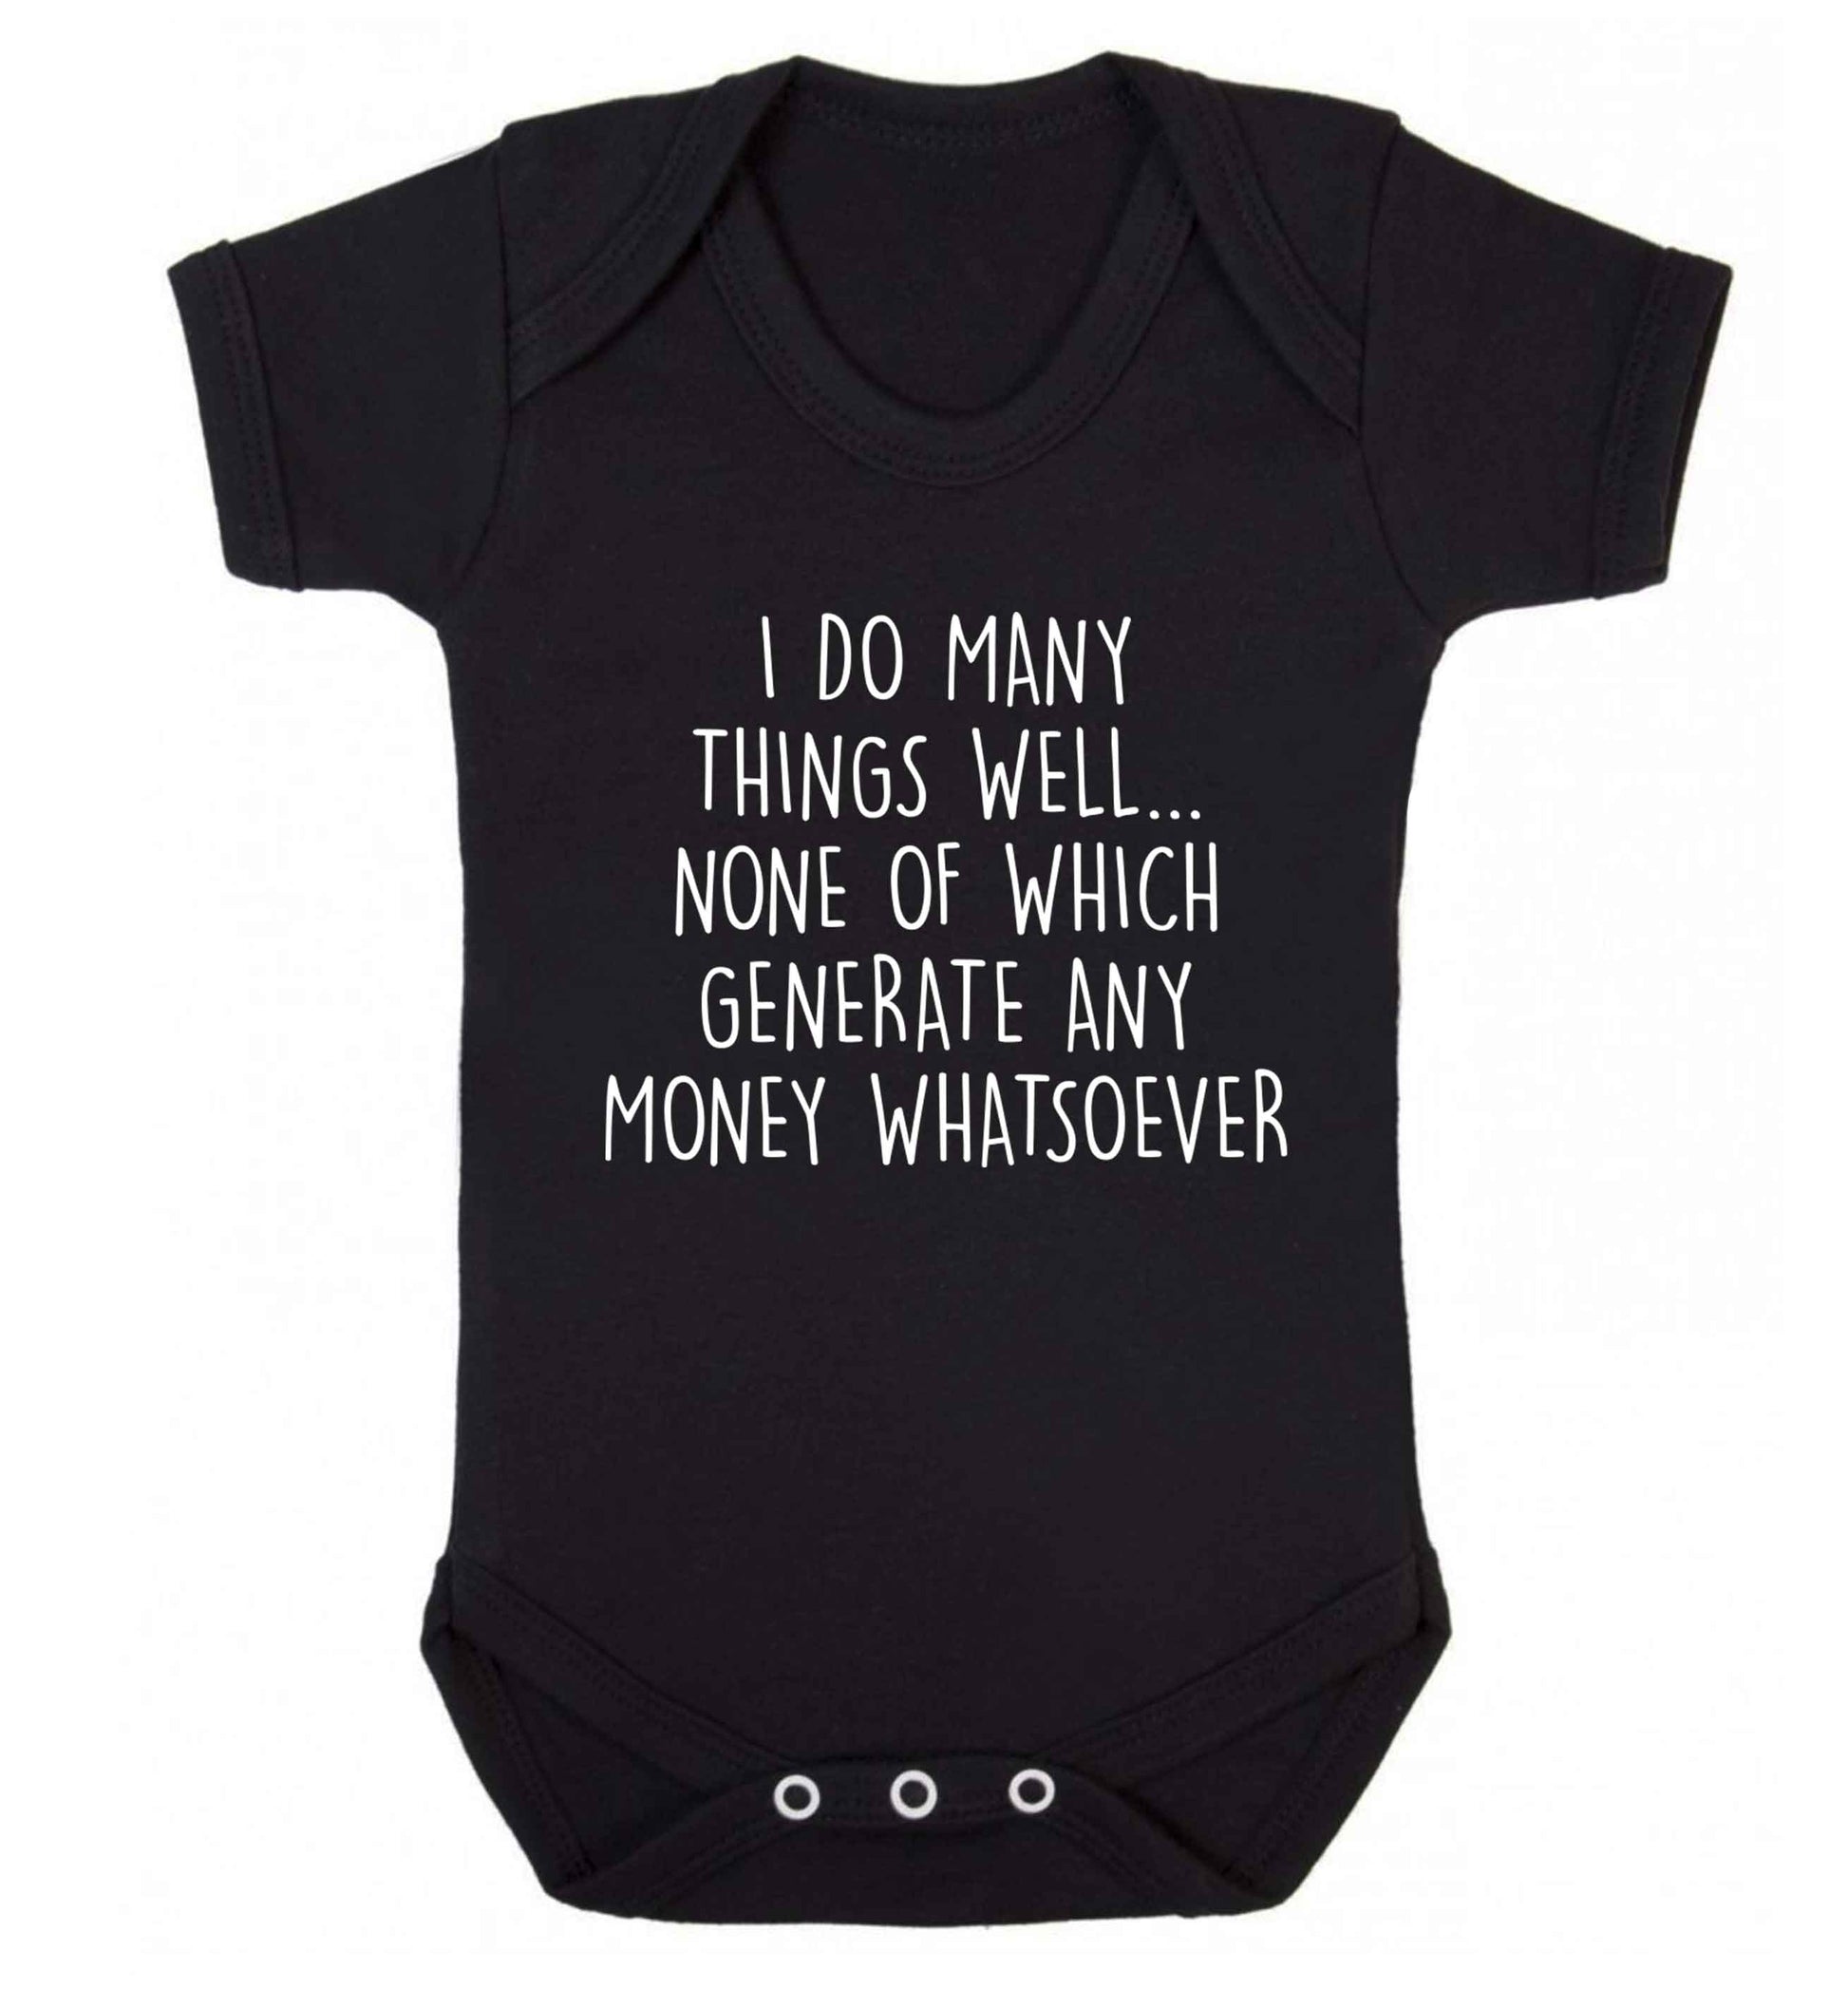 I do many things well none of which generate income Baby Vest black 18-24 months